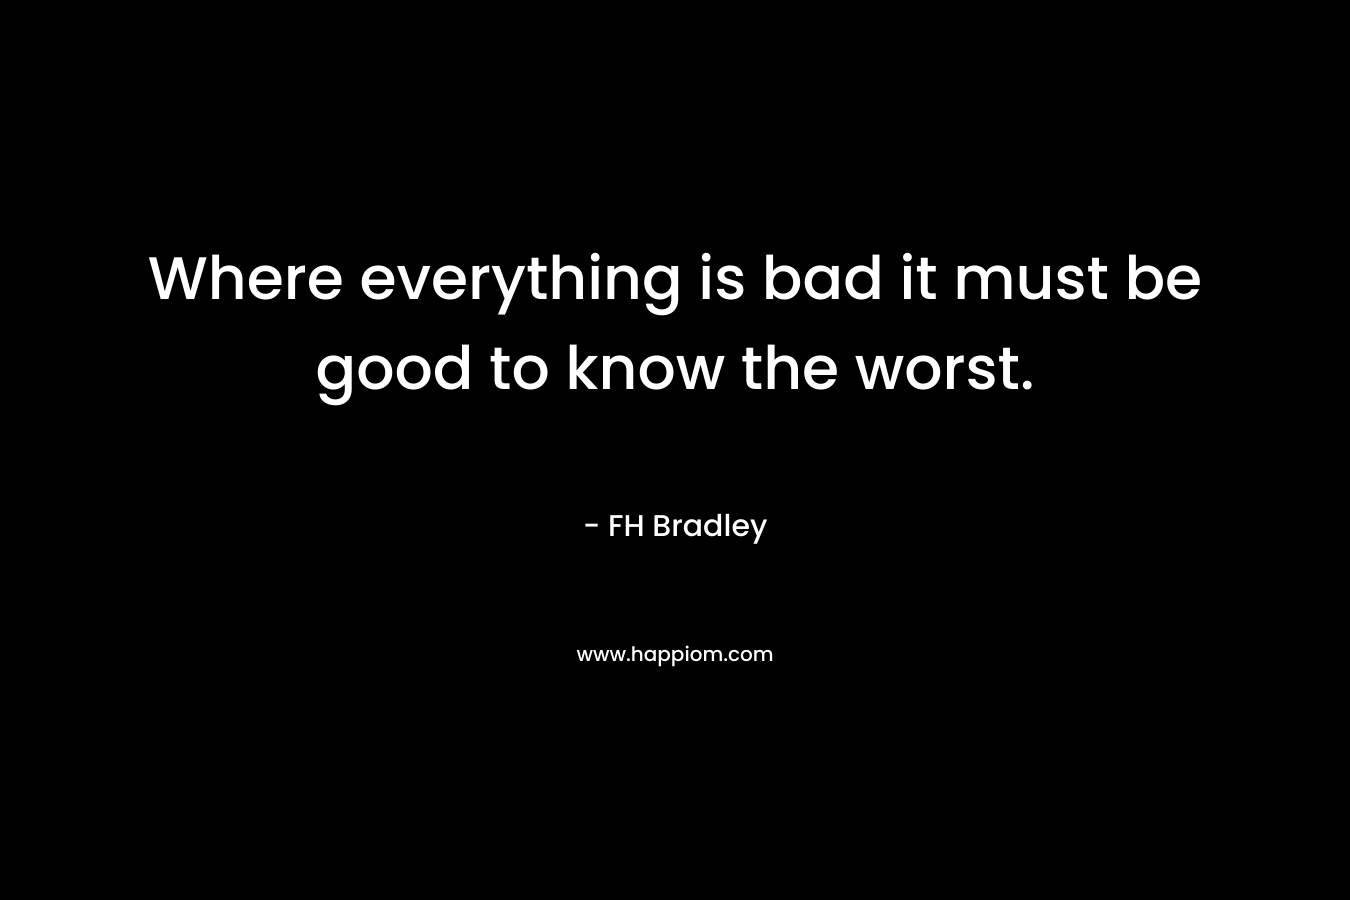 Where everything is bad it must be good to know the worst. – FH Bradley